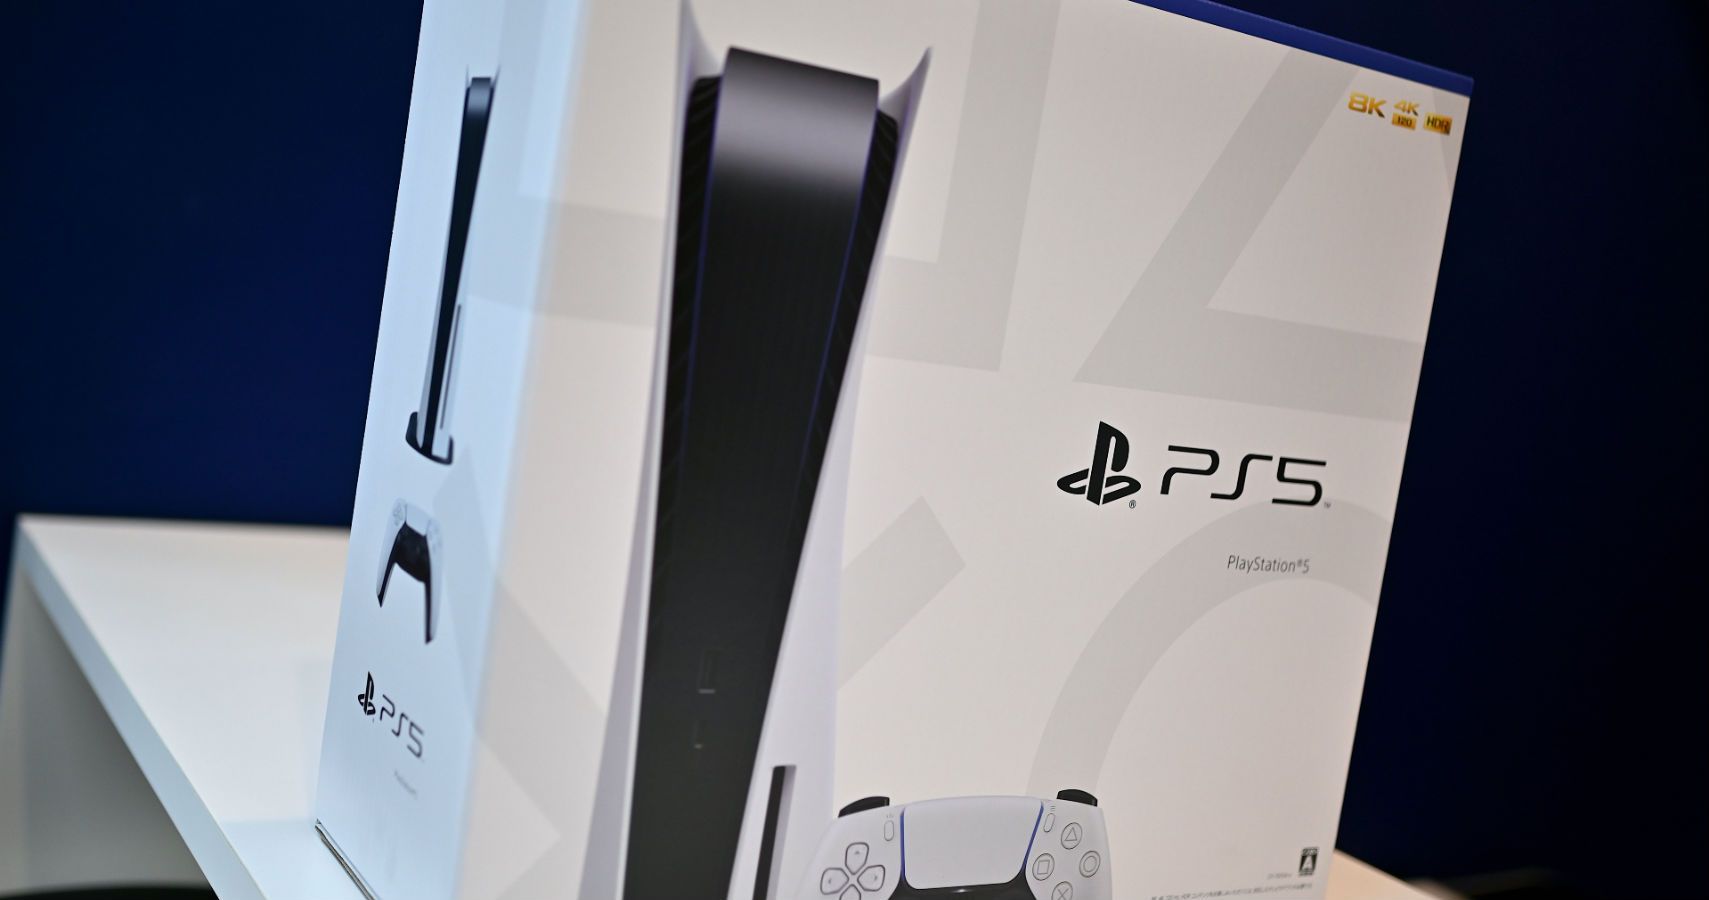 Scalper Group That Bought 3500 PS5s Claims To Have Secured 2000 More Consoles